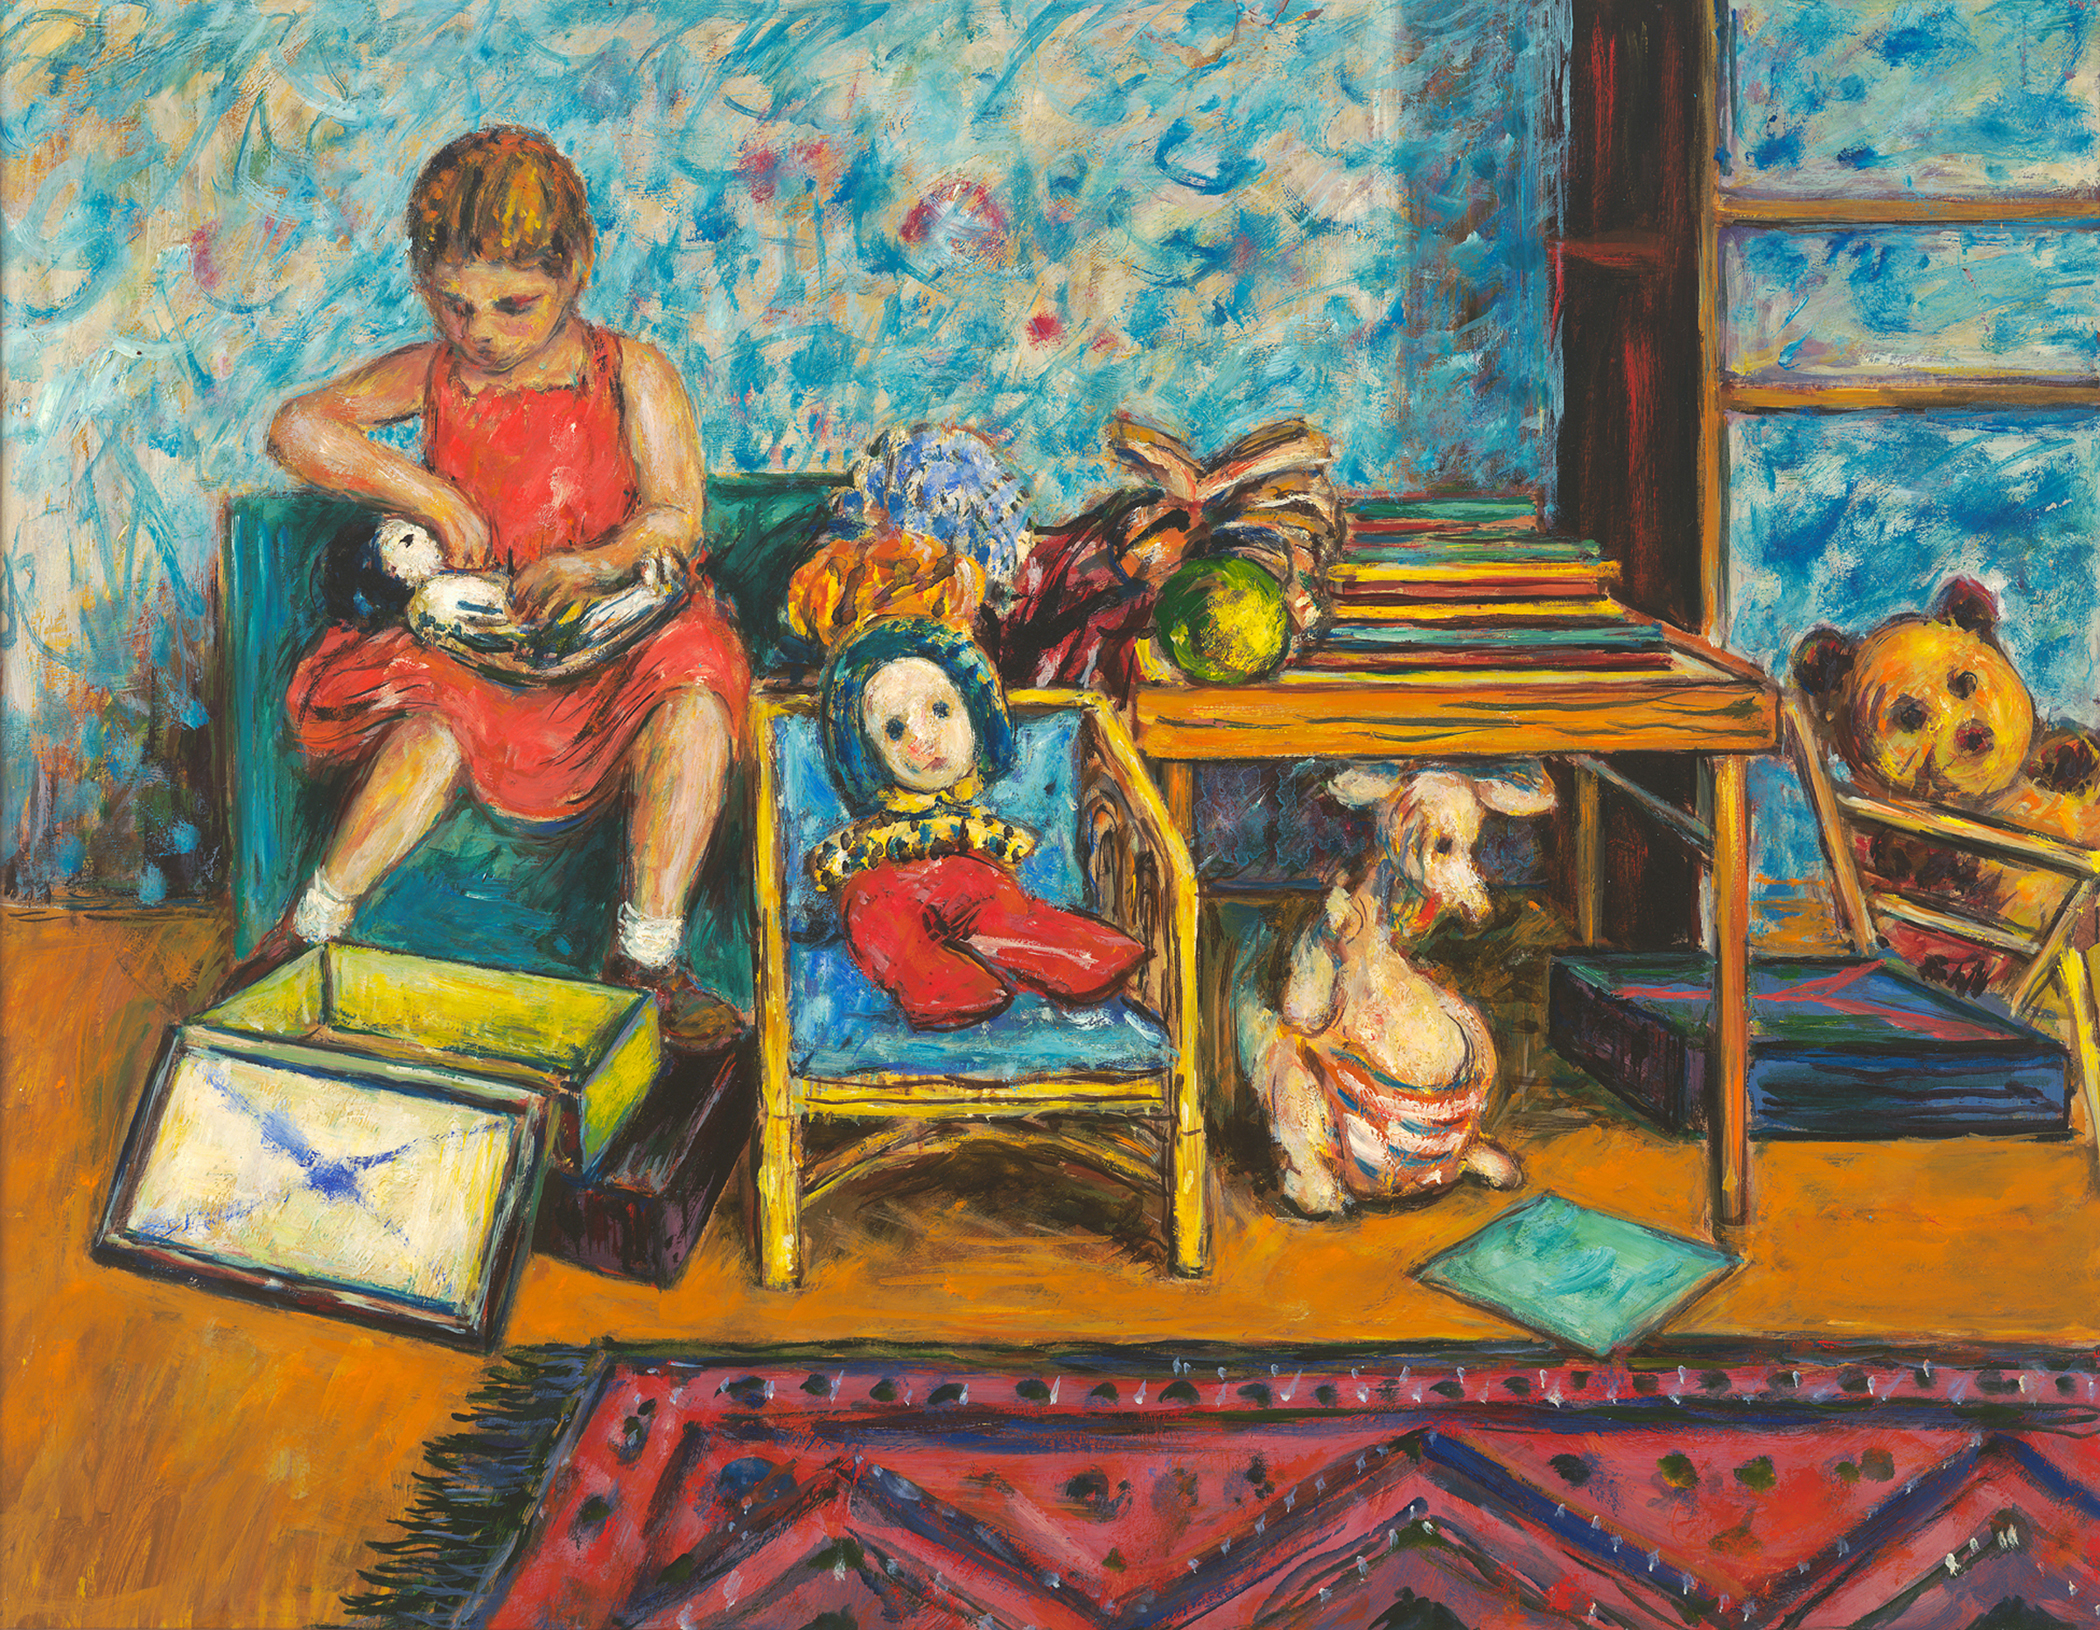  Anna and Sophie the Kangaroo
Oil on Panel
Estate Stamp, c. 1957
19 x 24 inches 